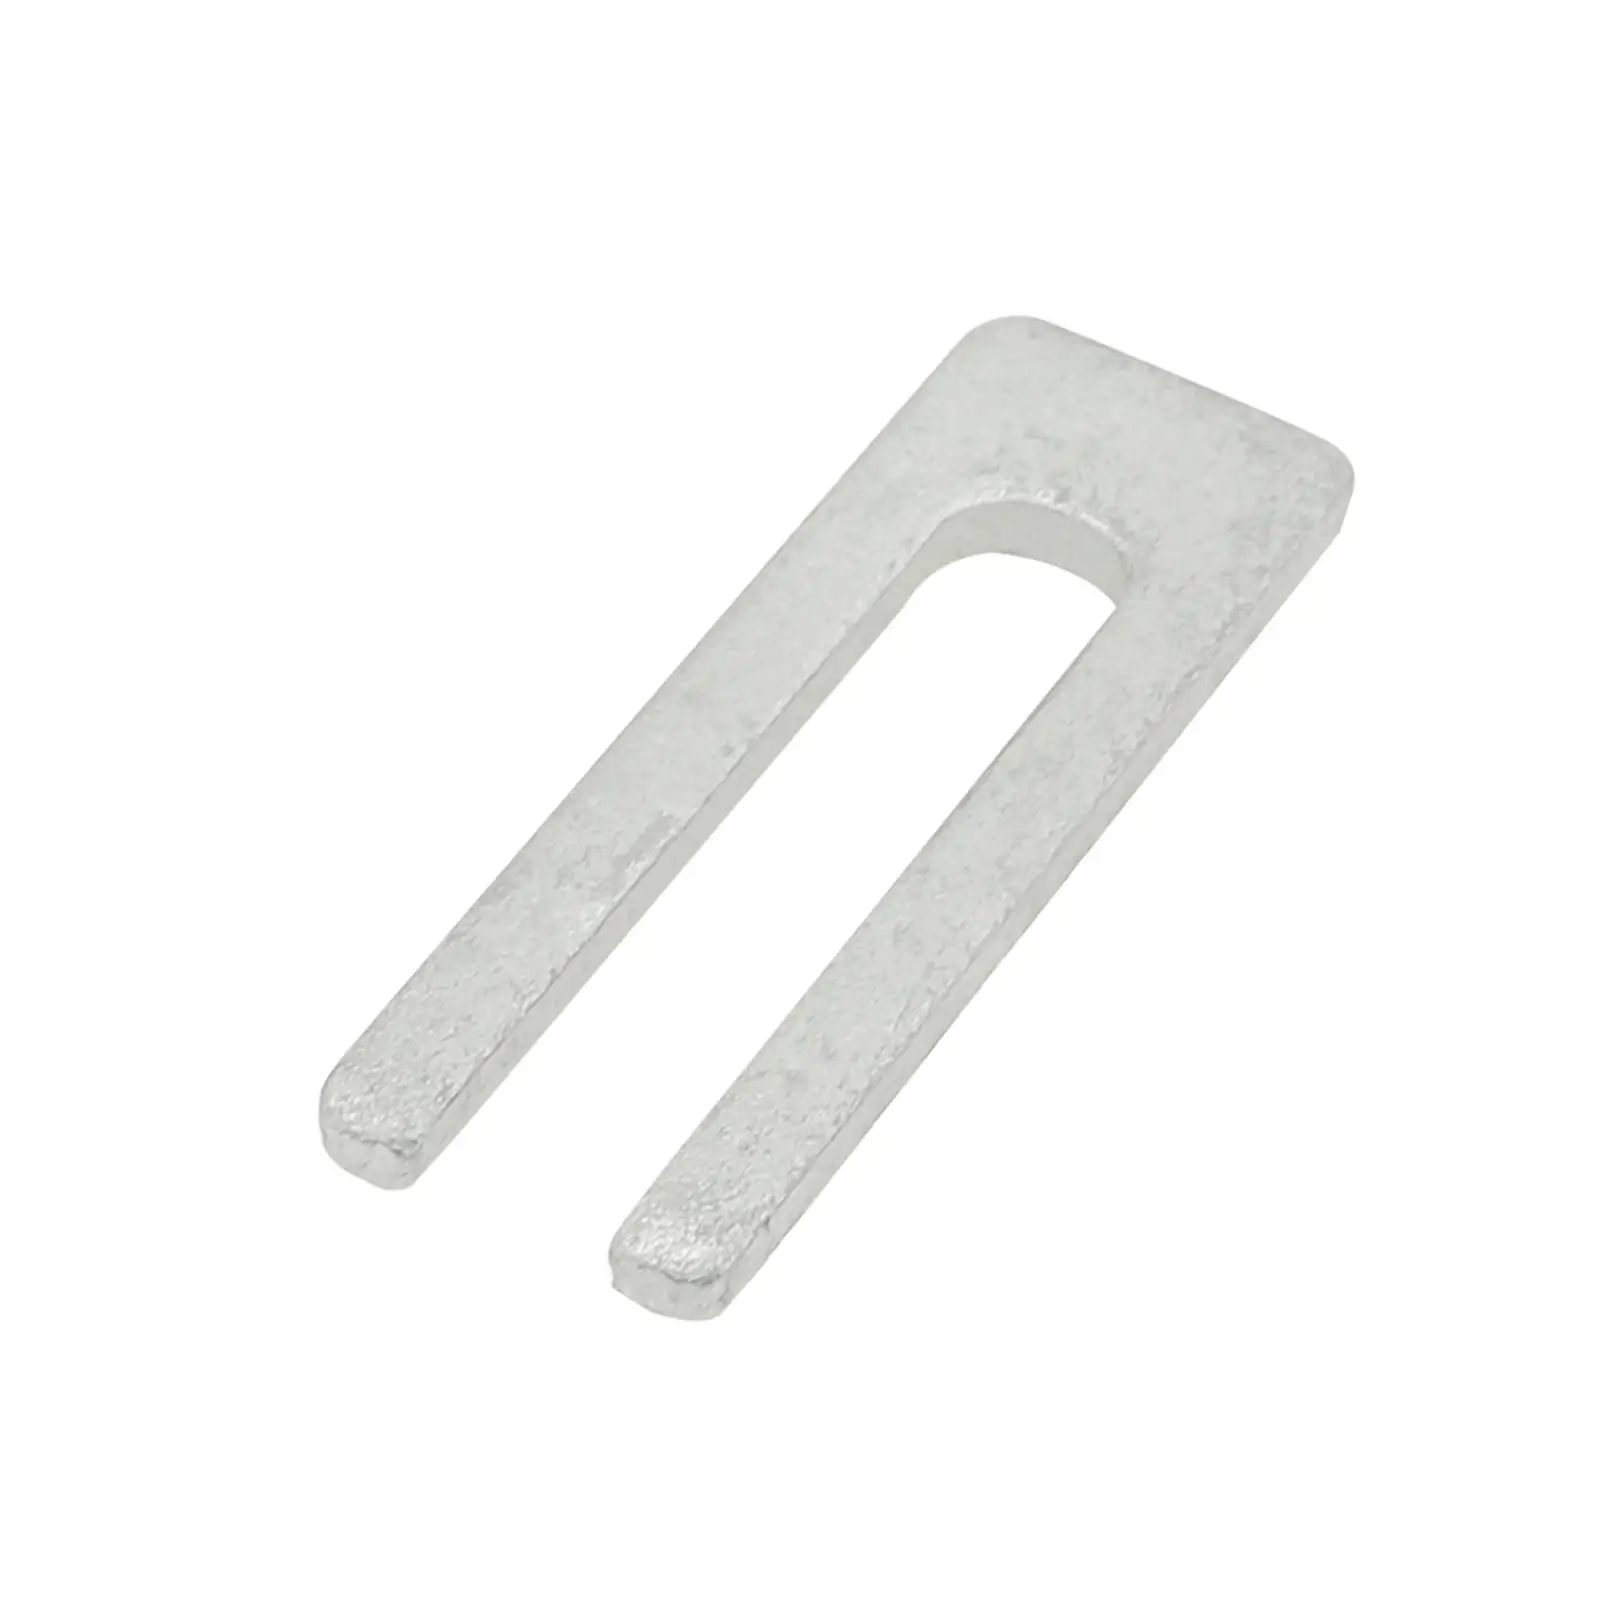 6H3-48538-00 for Yamaha Outboard Remote Control Cable Clamp Parts Professional Manufacturing Replacement Strong Easy to Install